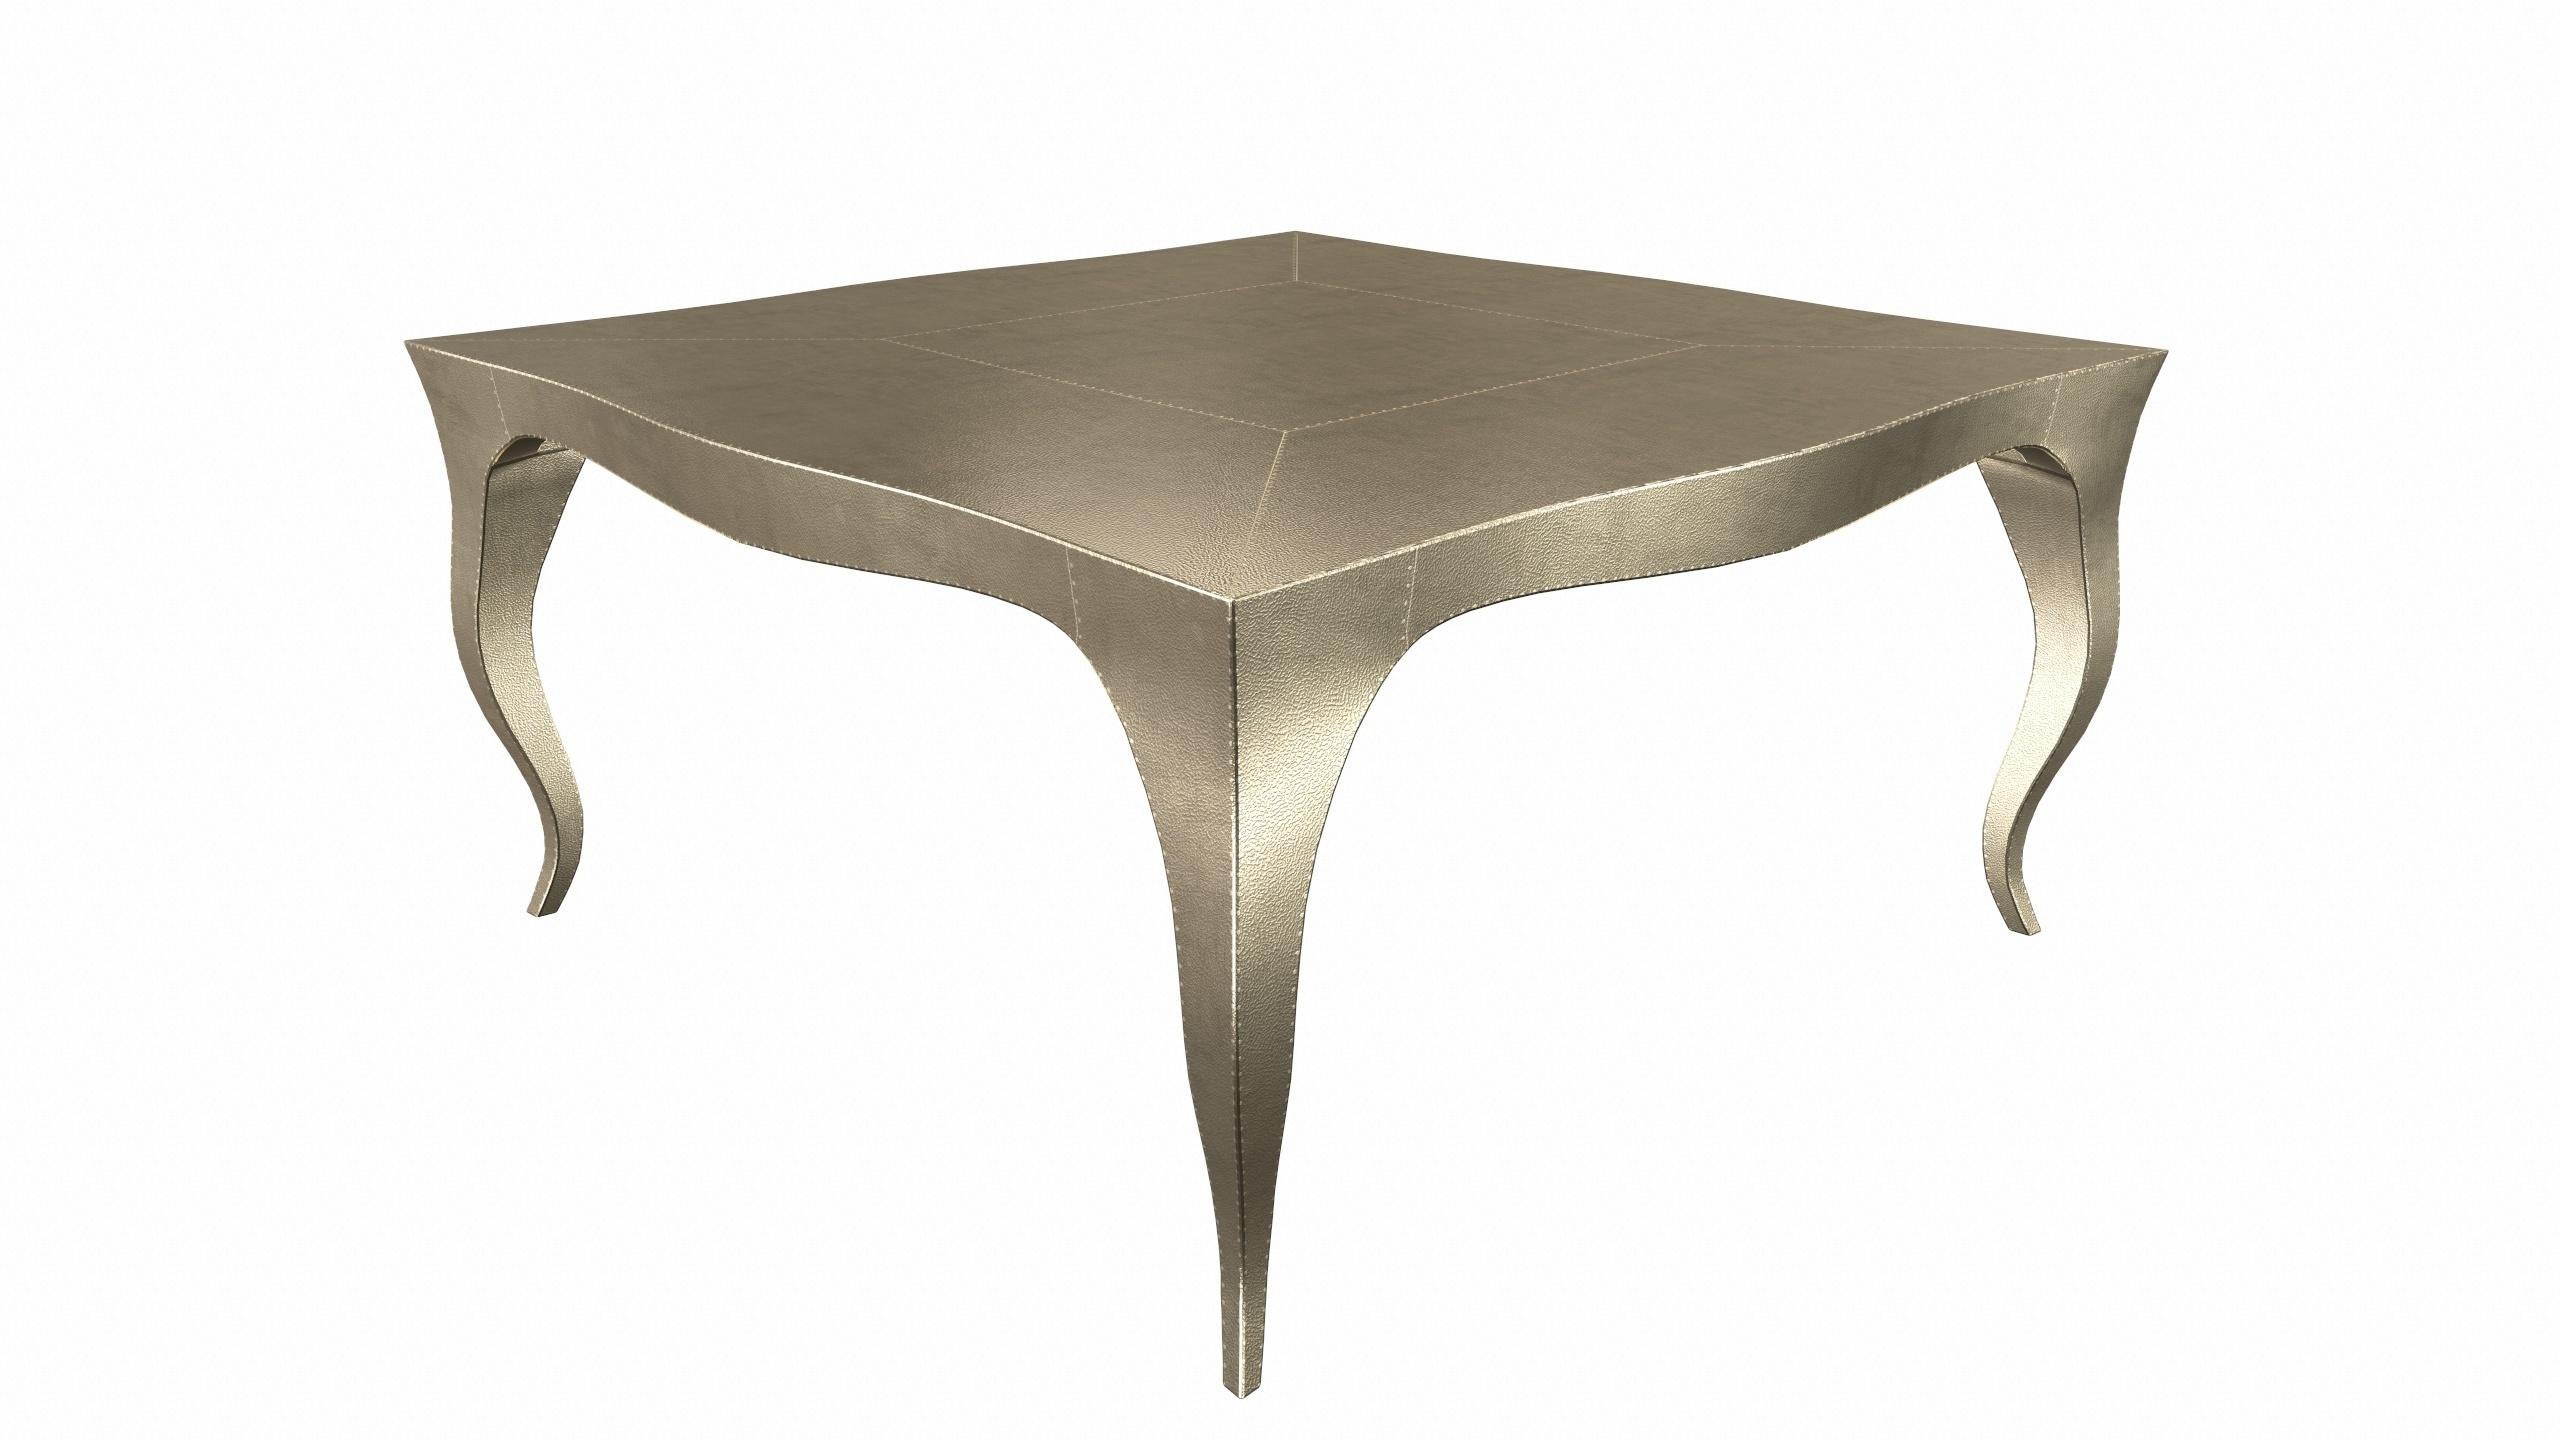 Other Louise Art Deco Coffee and Cocktail Tables Fine Hammered Brass by Paul Mathieu For Sale